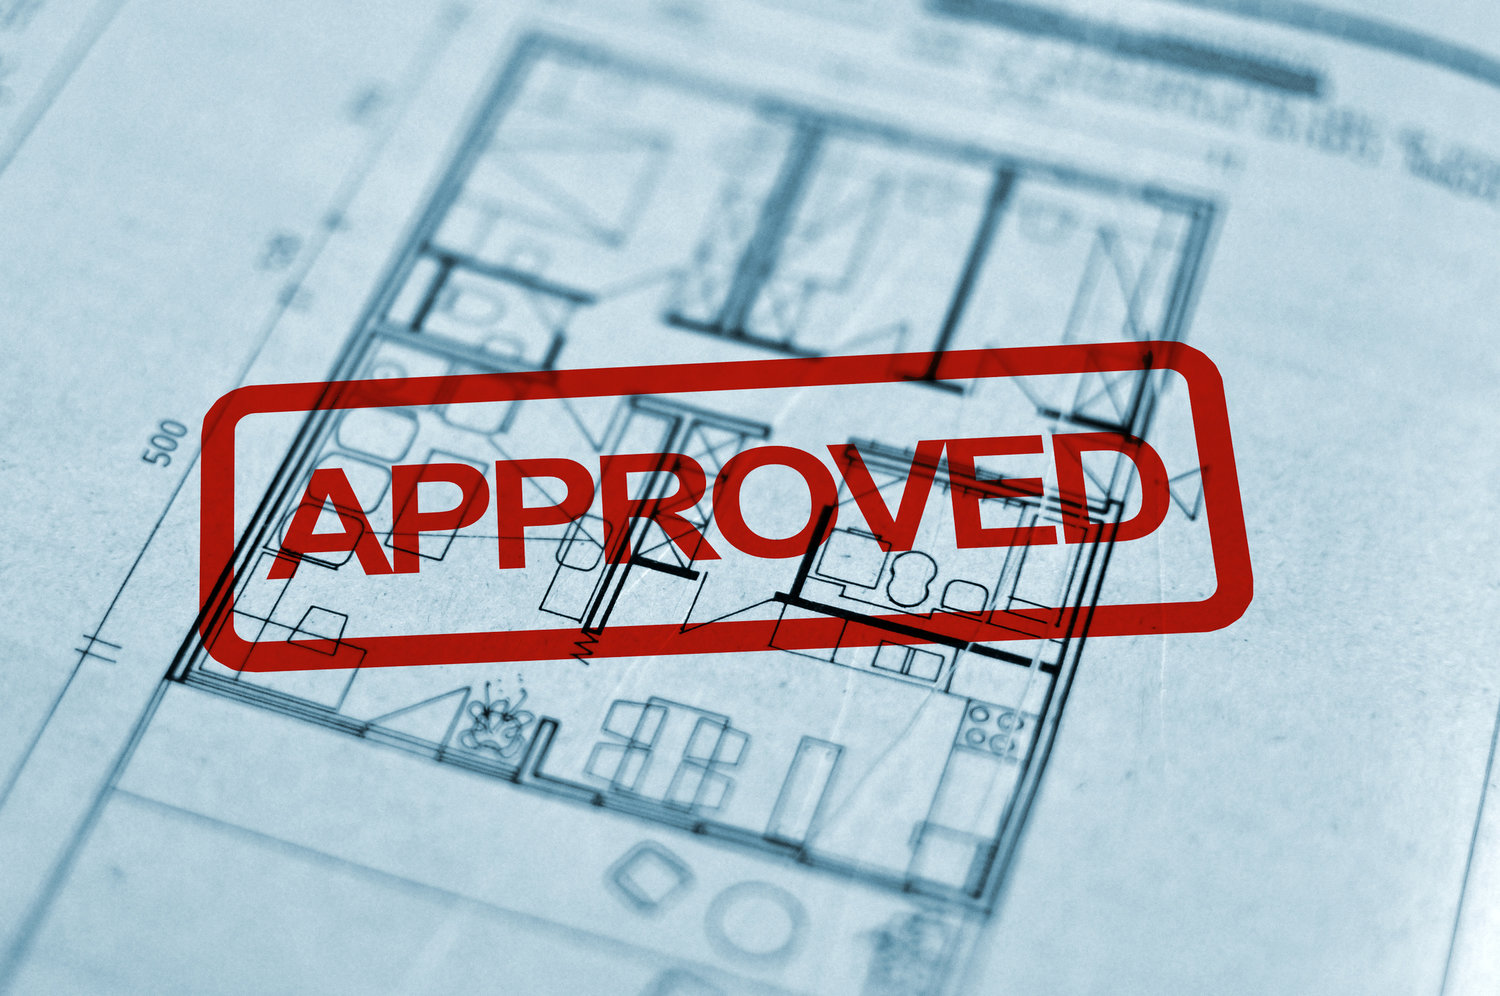 How planning permission works in UK